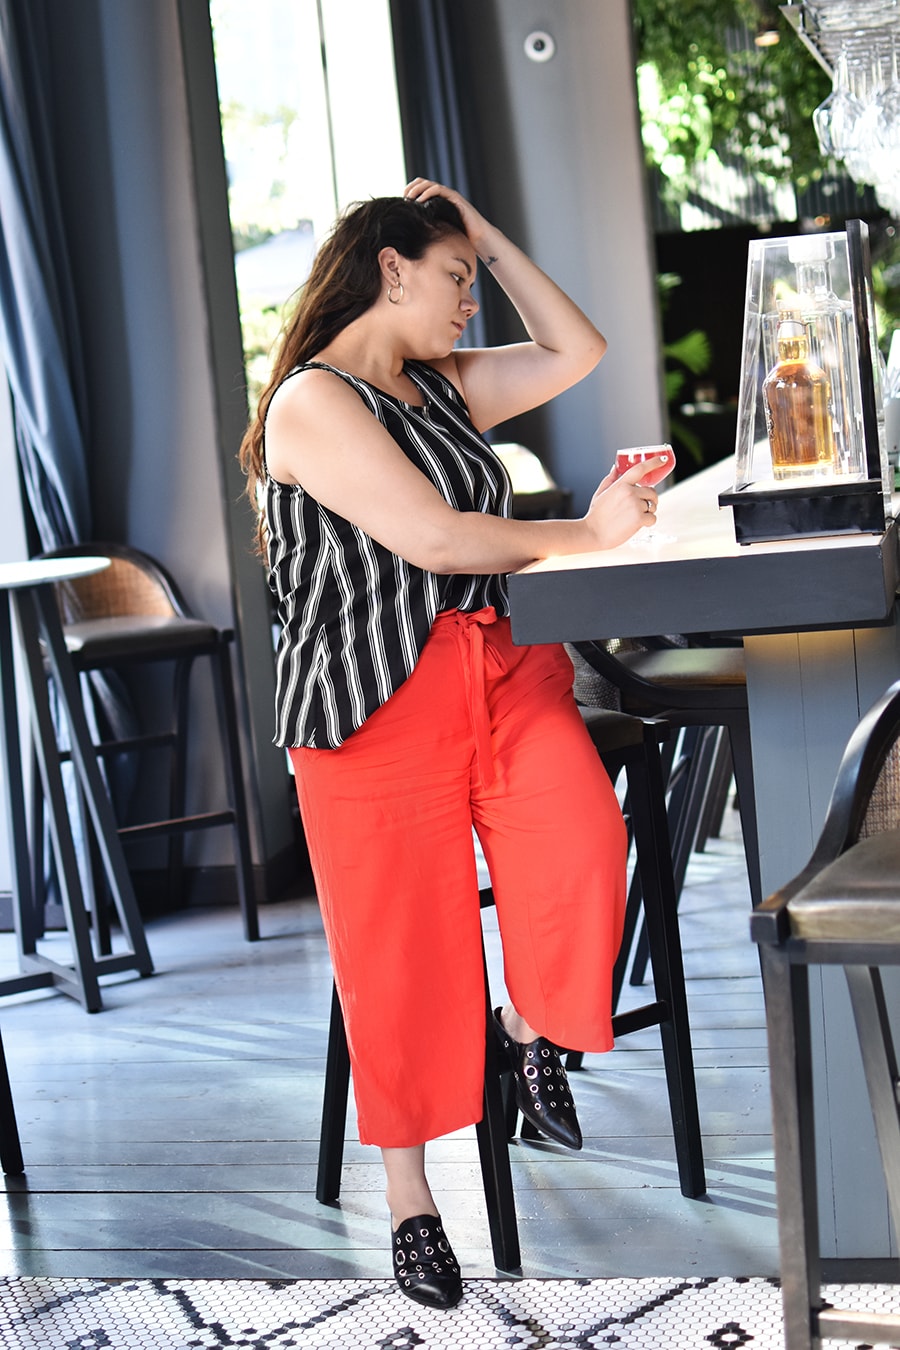 Culotte pants - after office outfit chic casual plus size luisa verdee